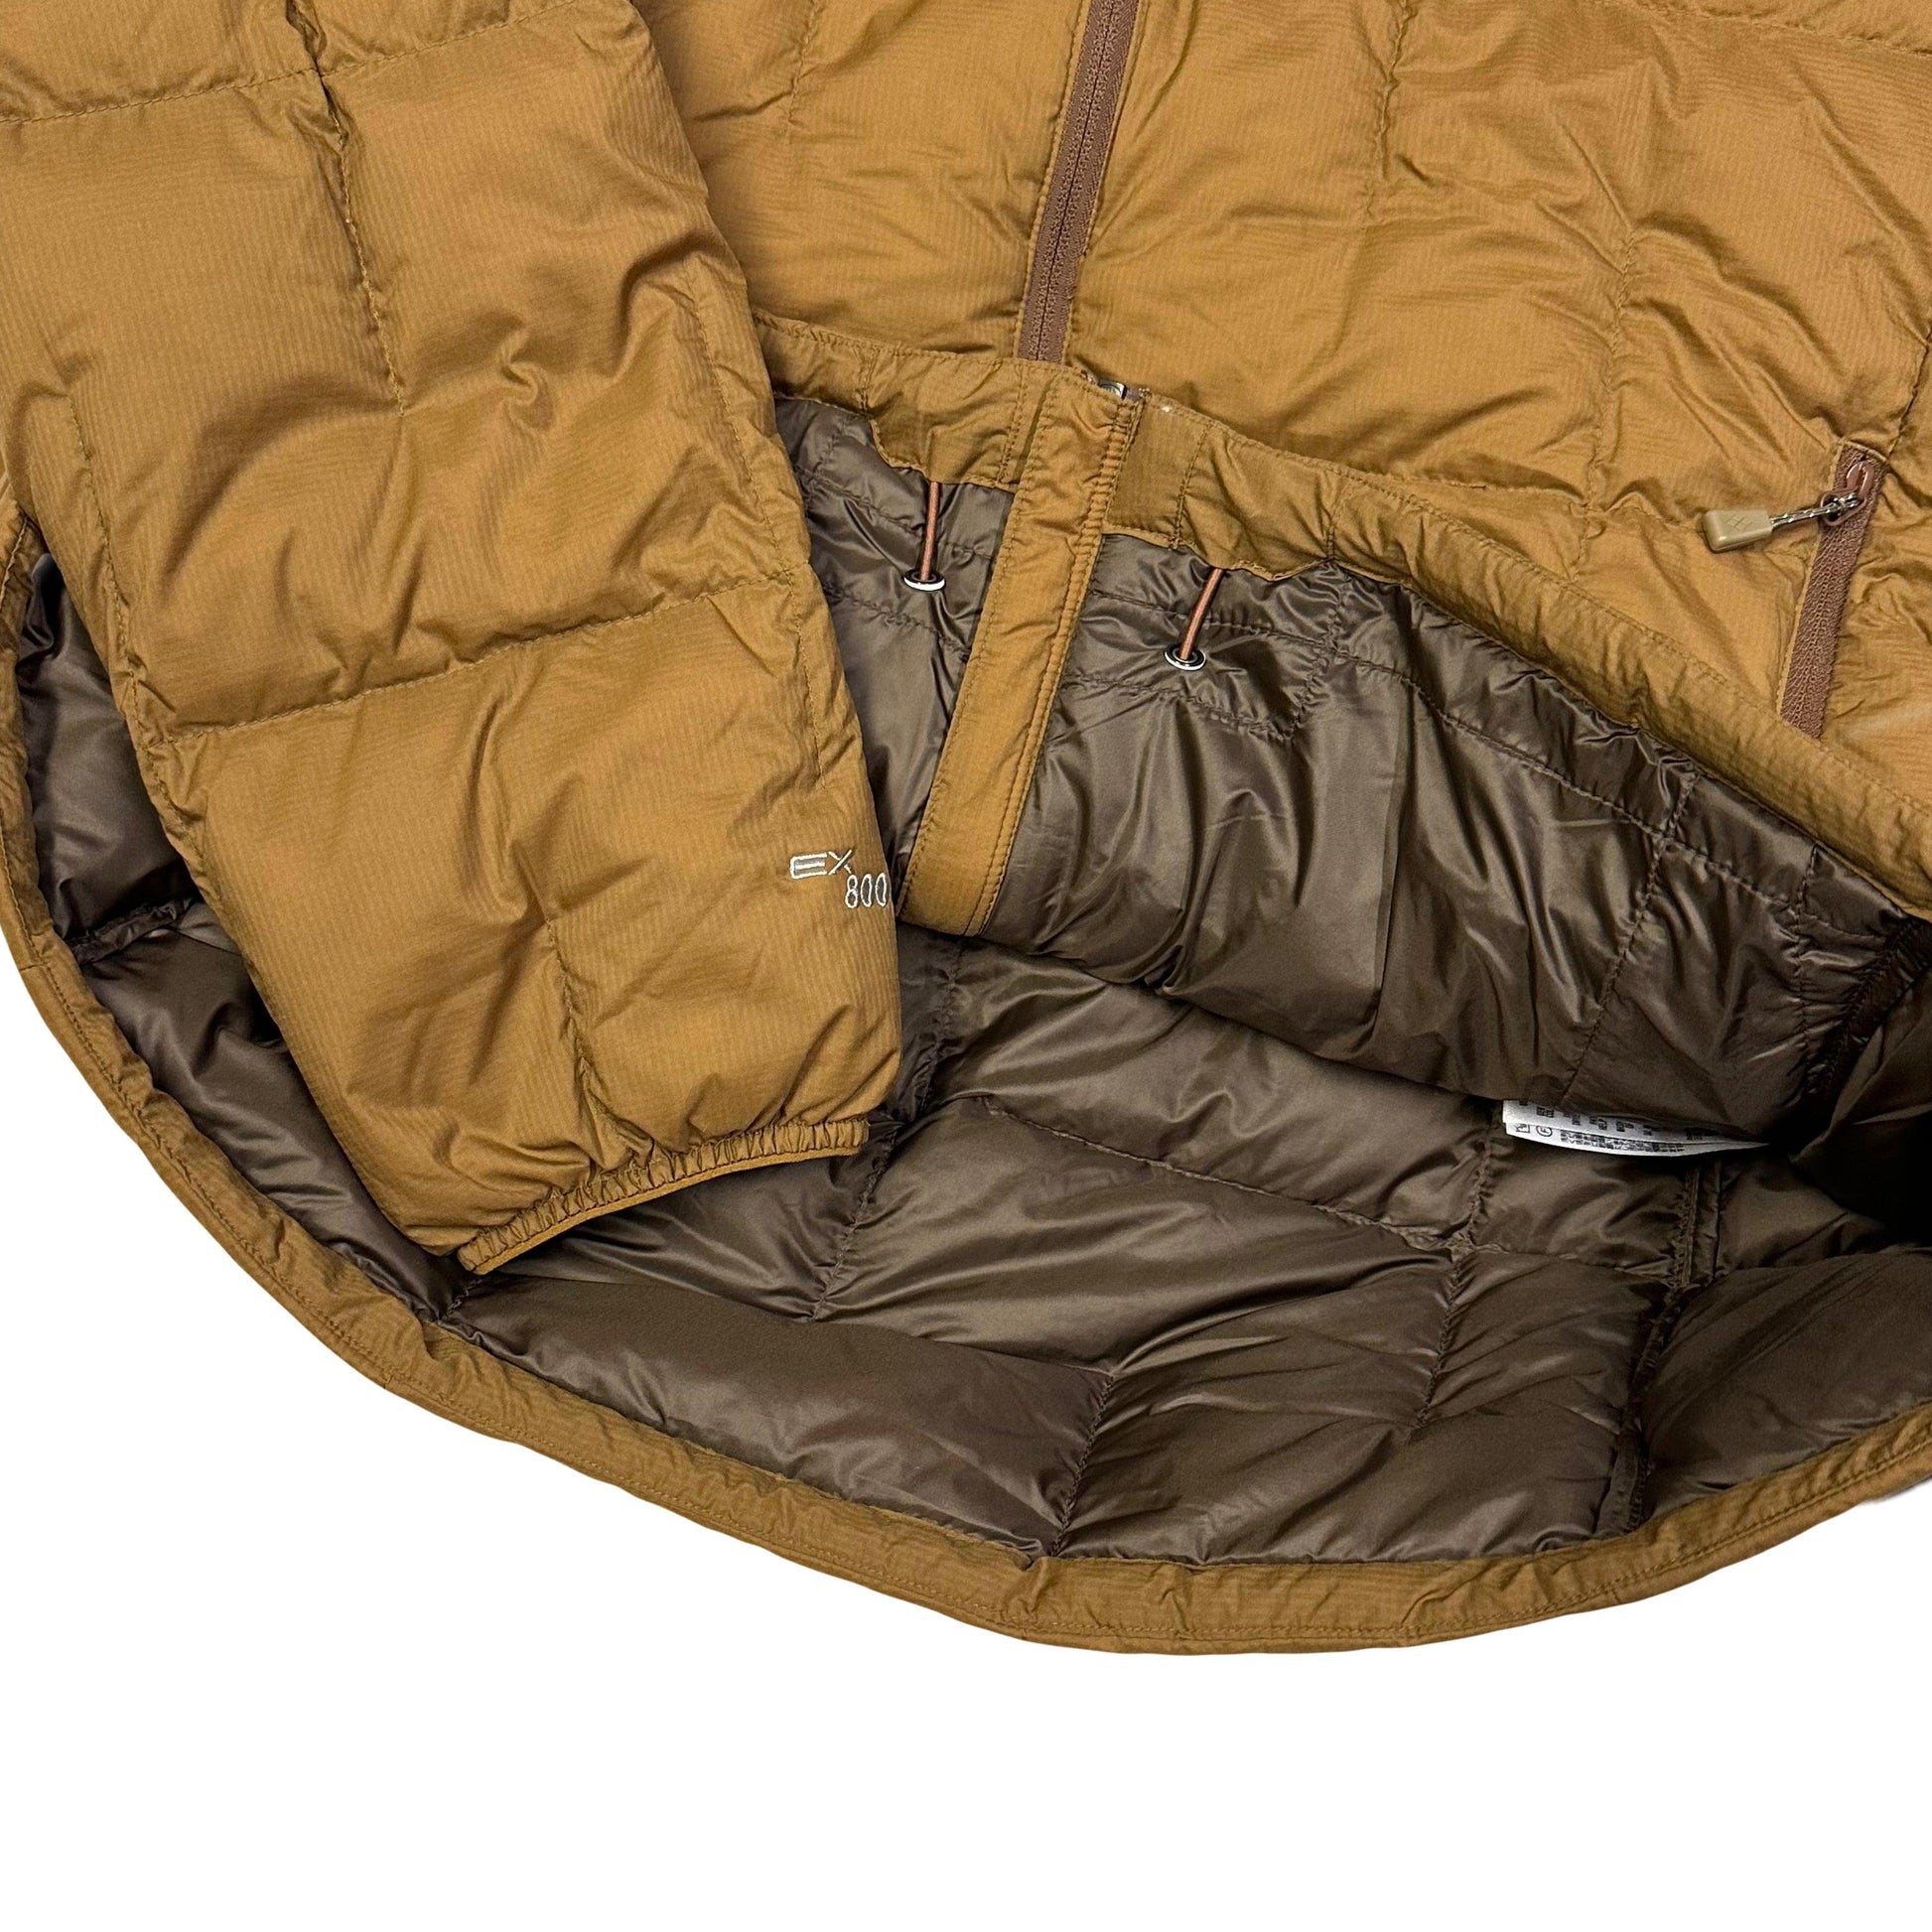 Montbell Square Stitch EX 800 Down Puffer Jacket In Brown ( L ) - Known Source